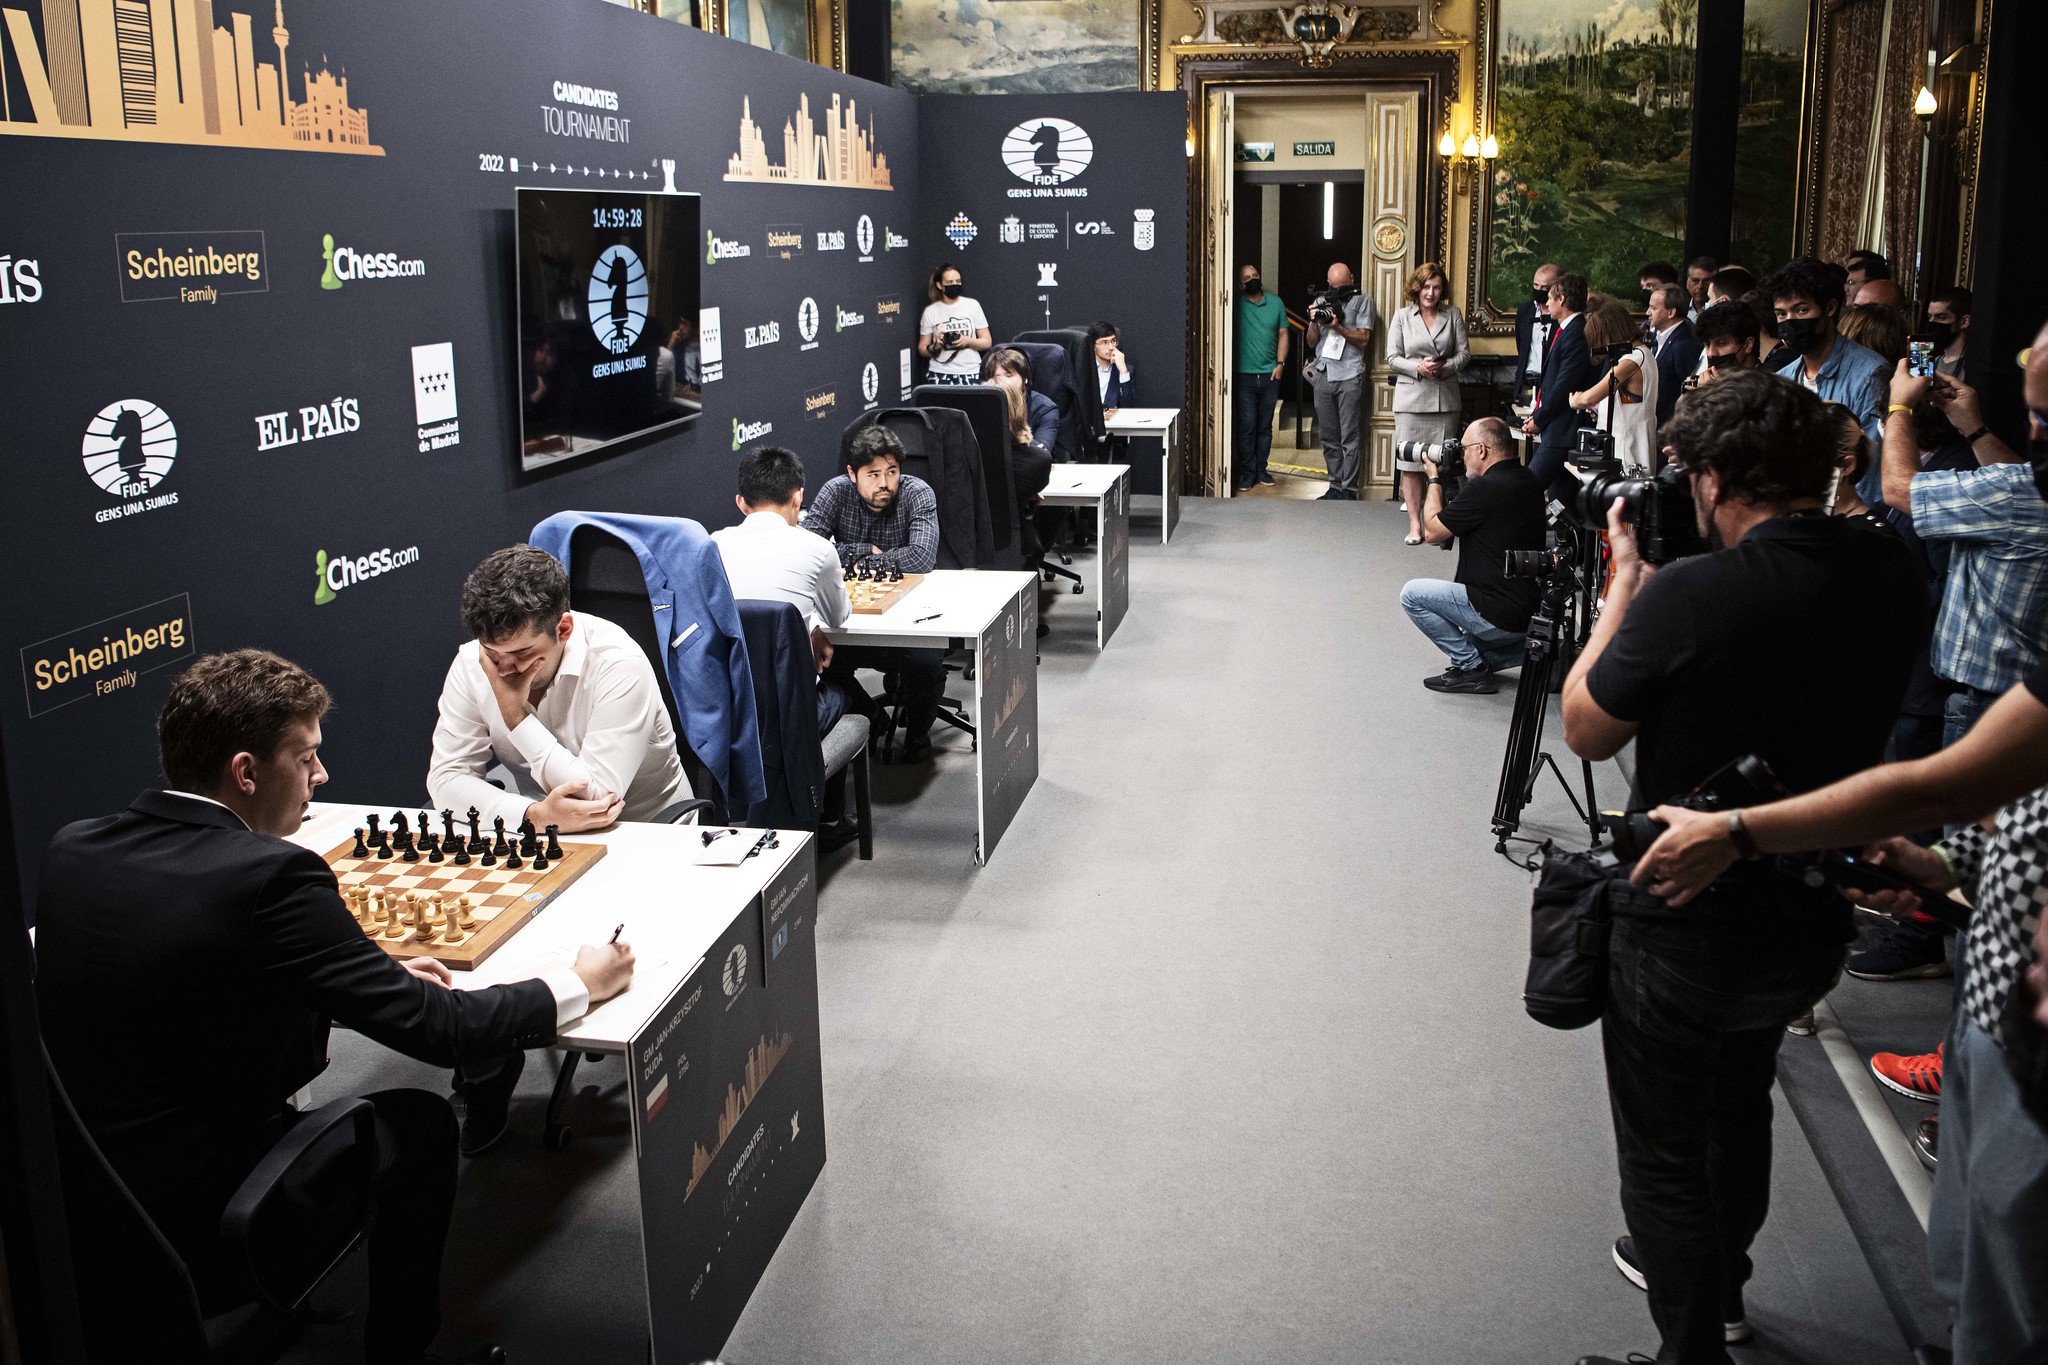 chess24.com on X: FIDE give up on the Women's knockout tournament format  they invented solely because of Russia's invasion of Ukraine and now plan  to hold the Open and Women's Candidates Tournaments